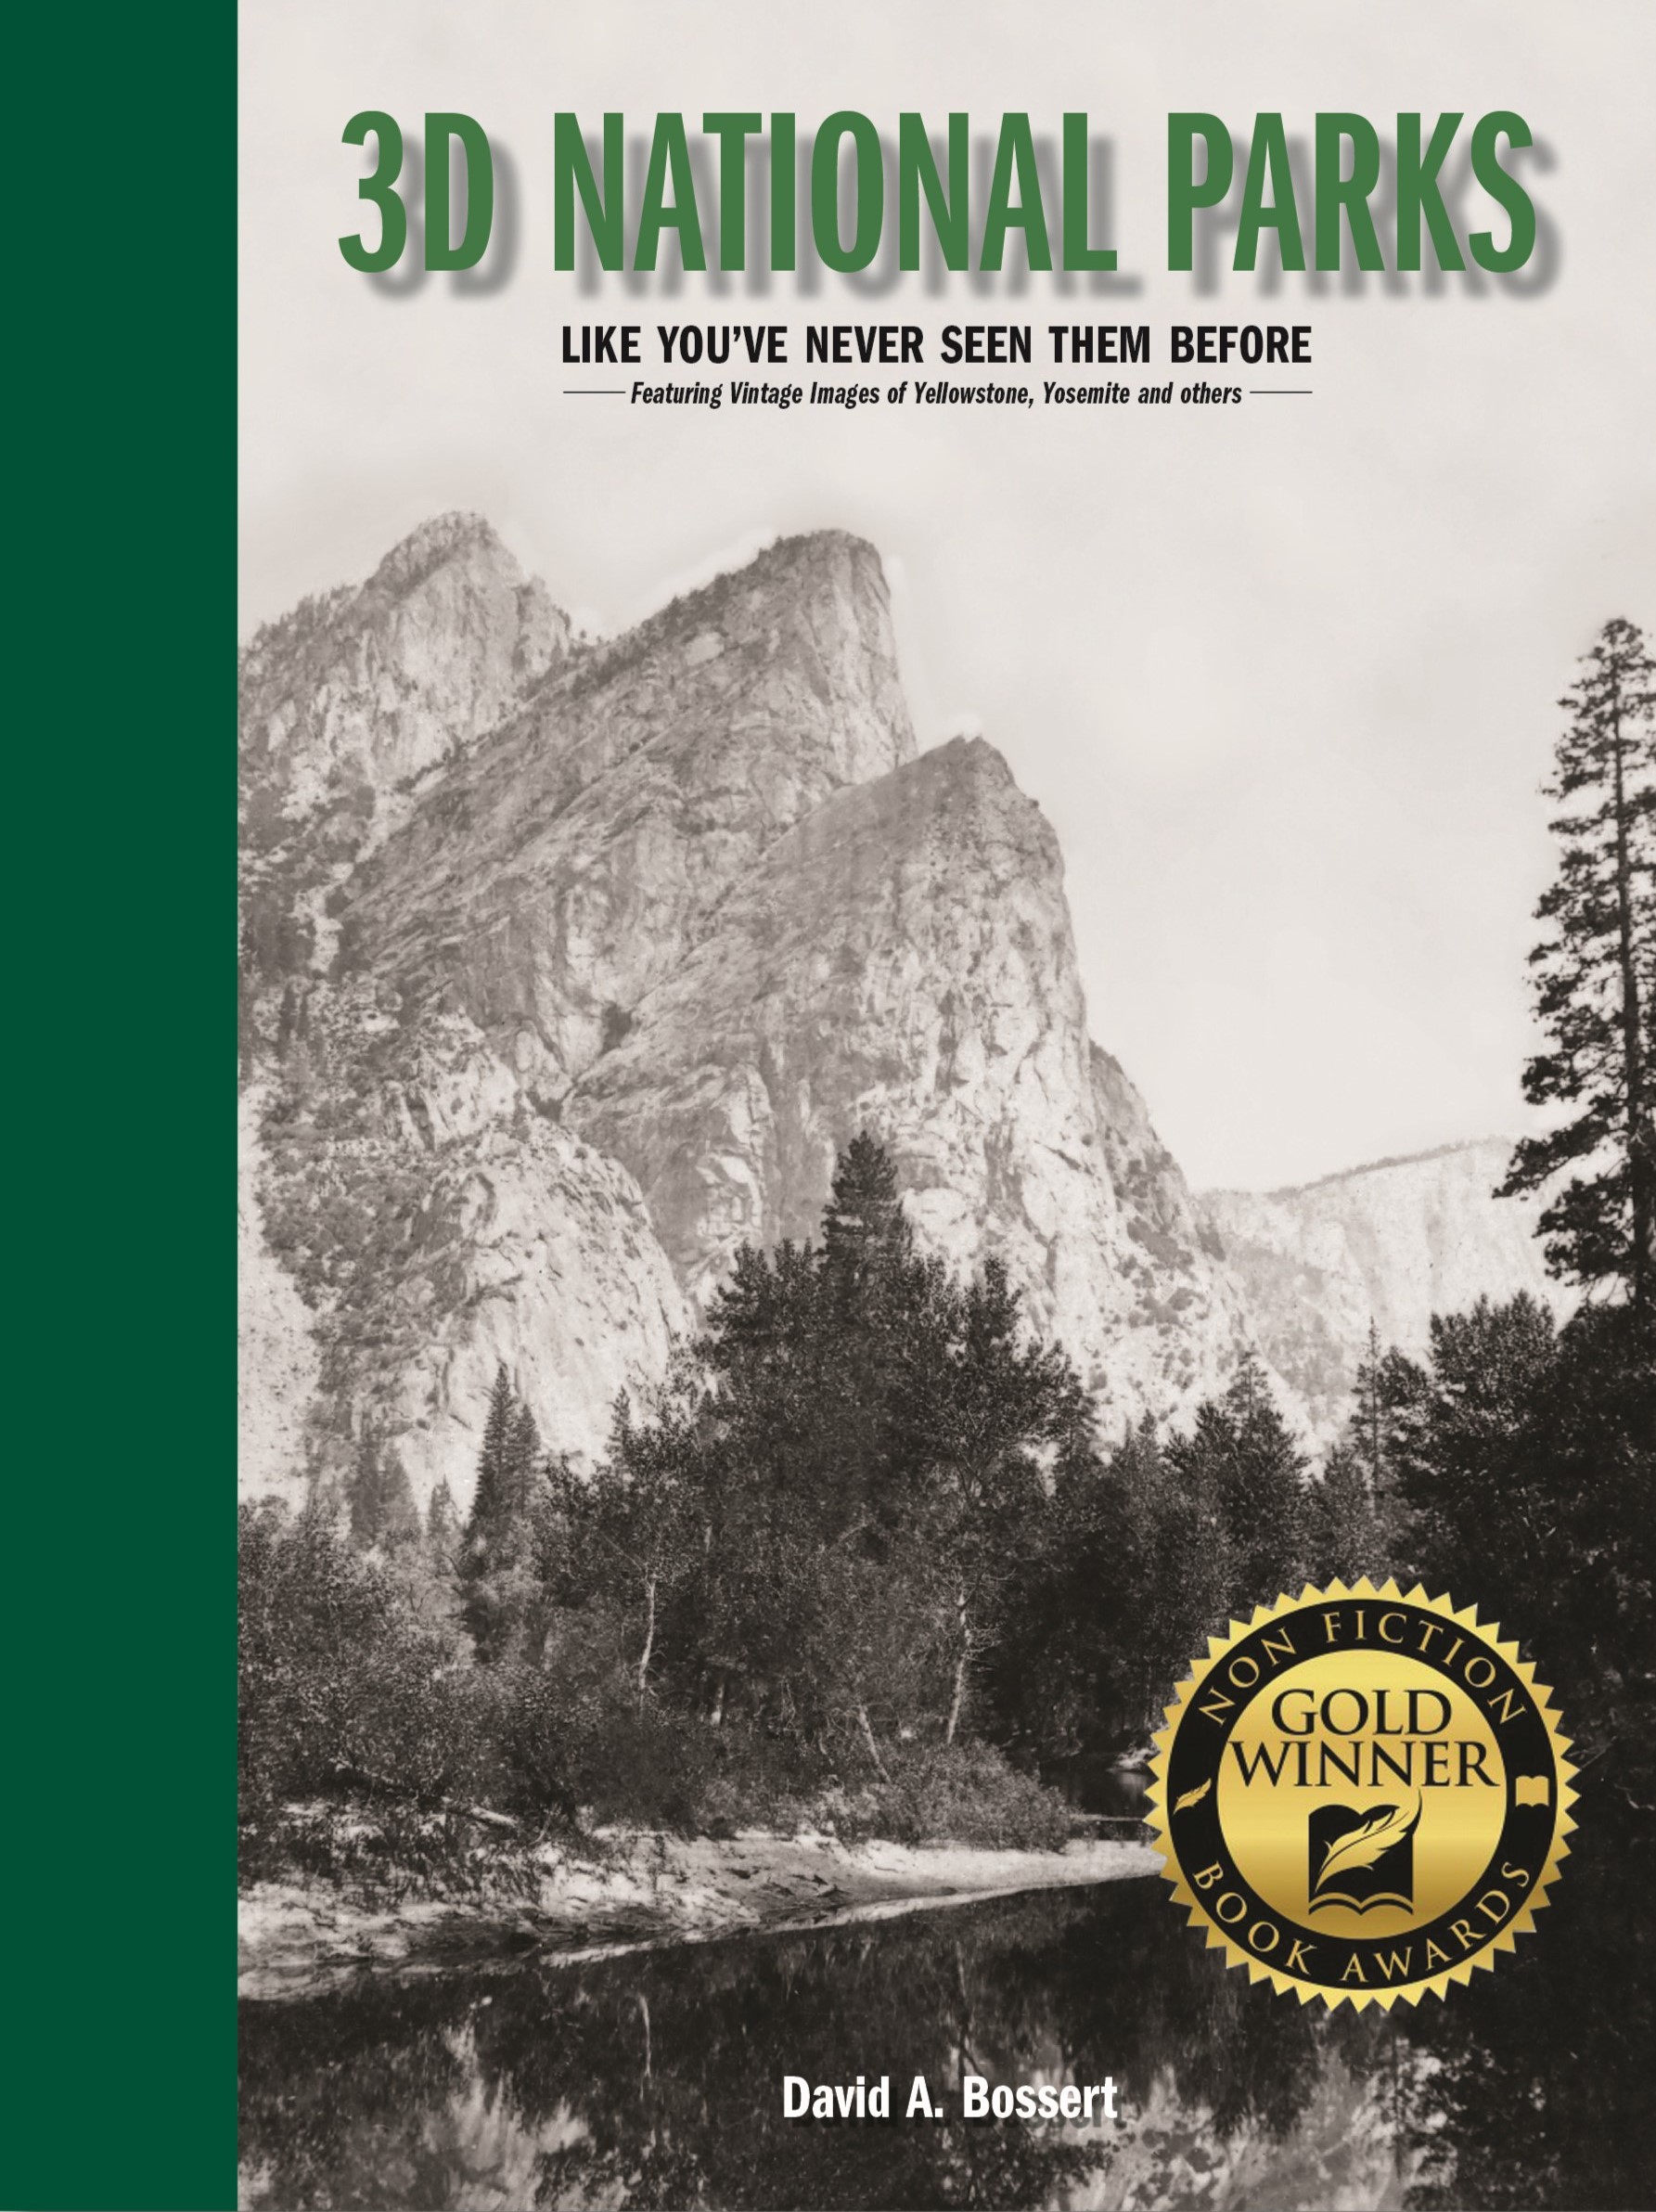 3D National Parks: Like You've Never Seen Them Before by David A. Bossert